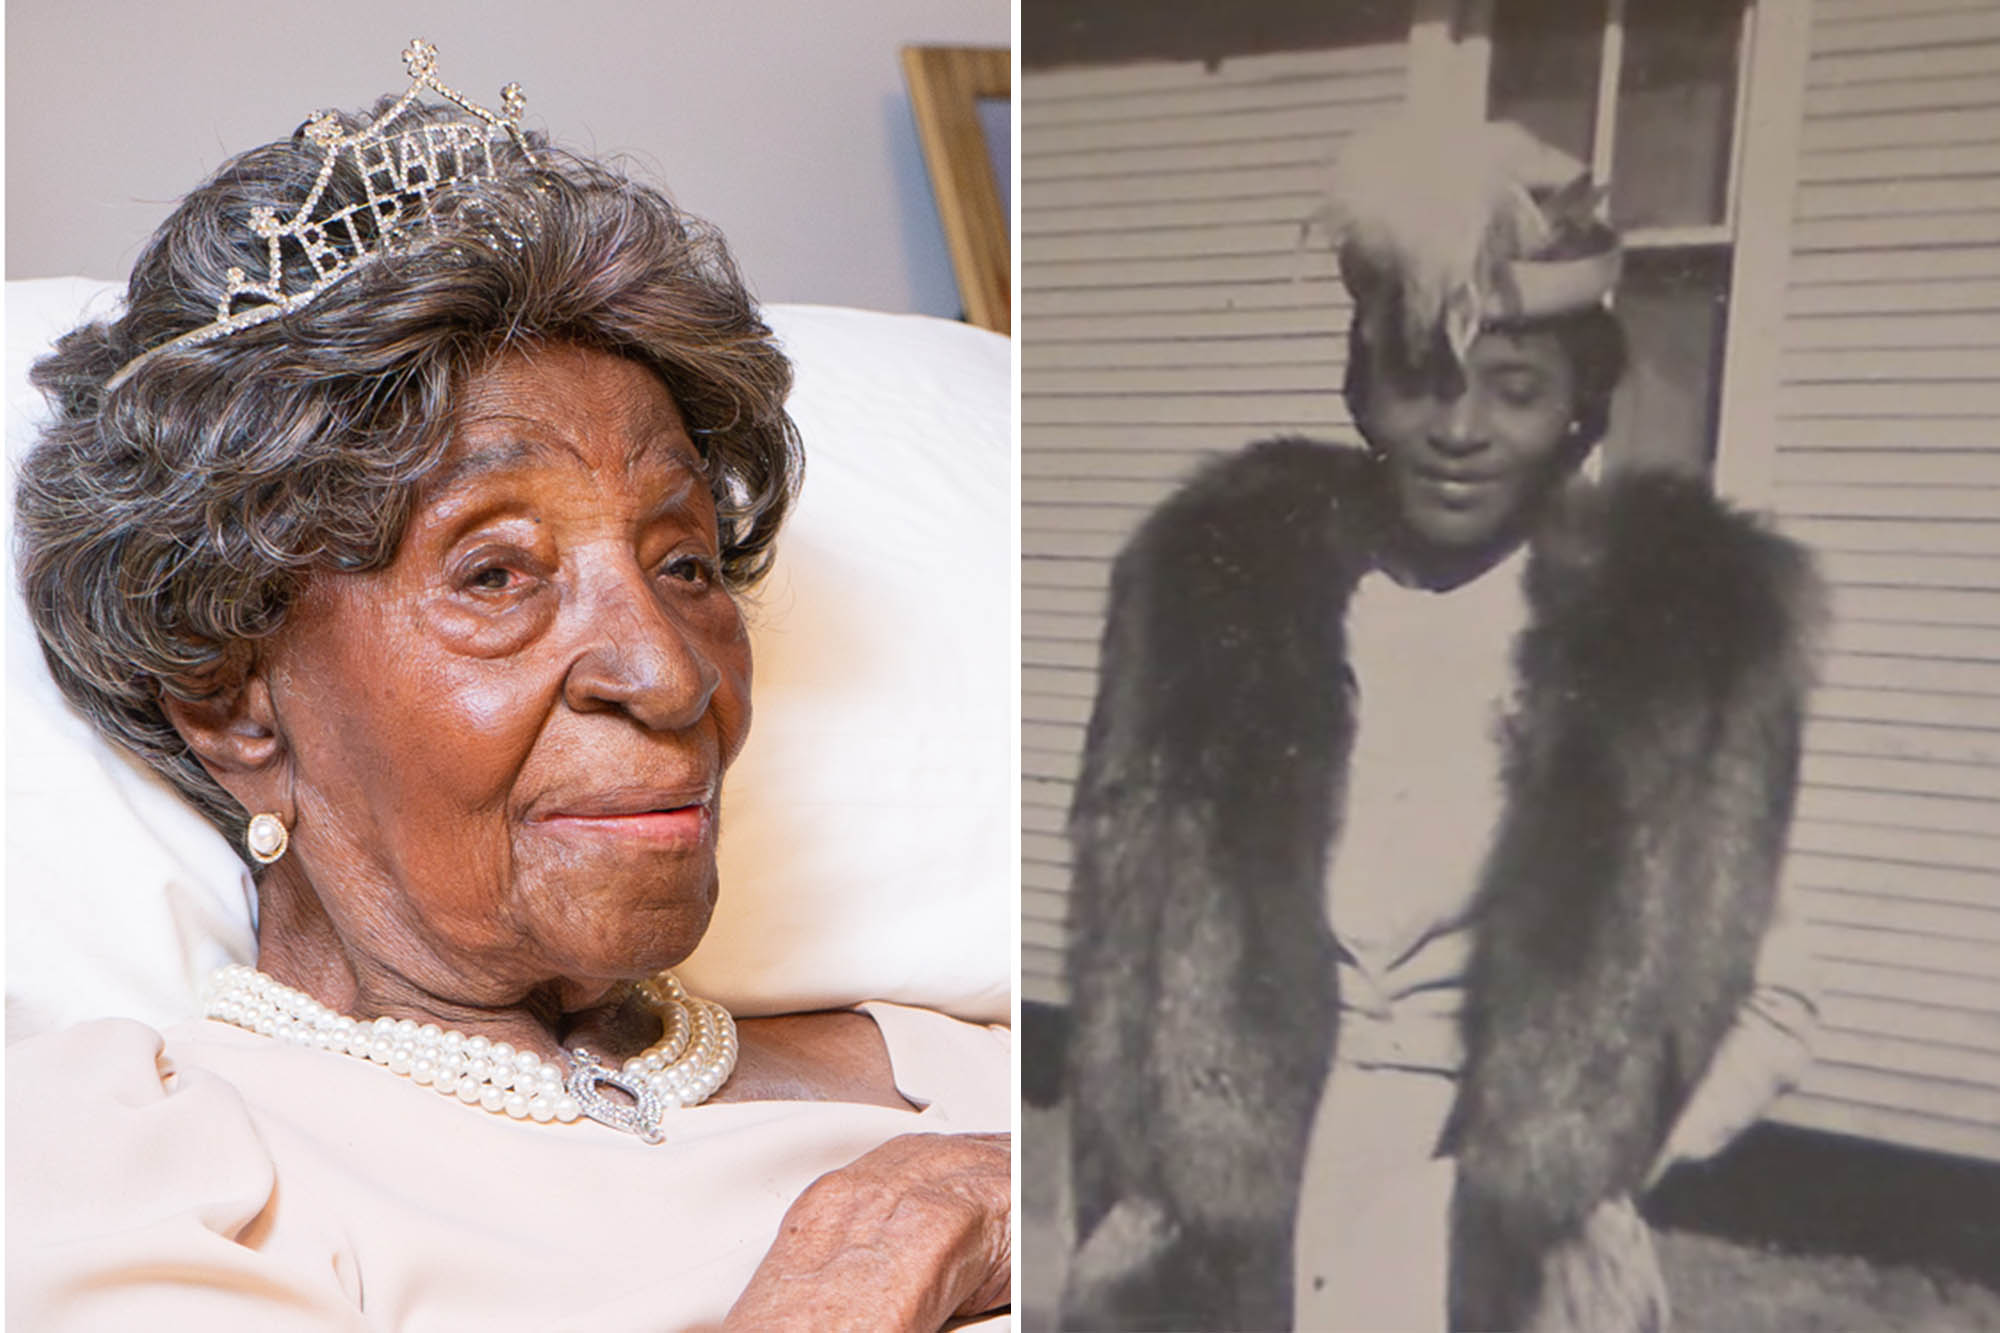 America’s oldest person turns 115 — here’s her advice for living a long, happy life